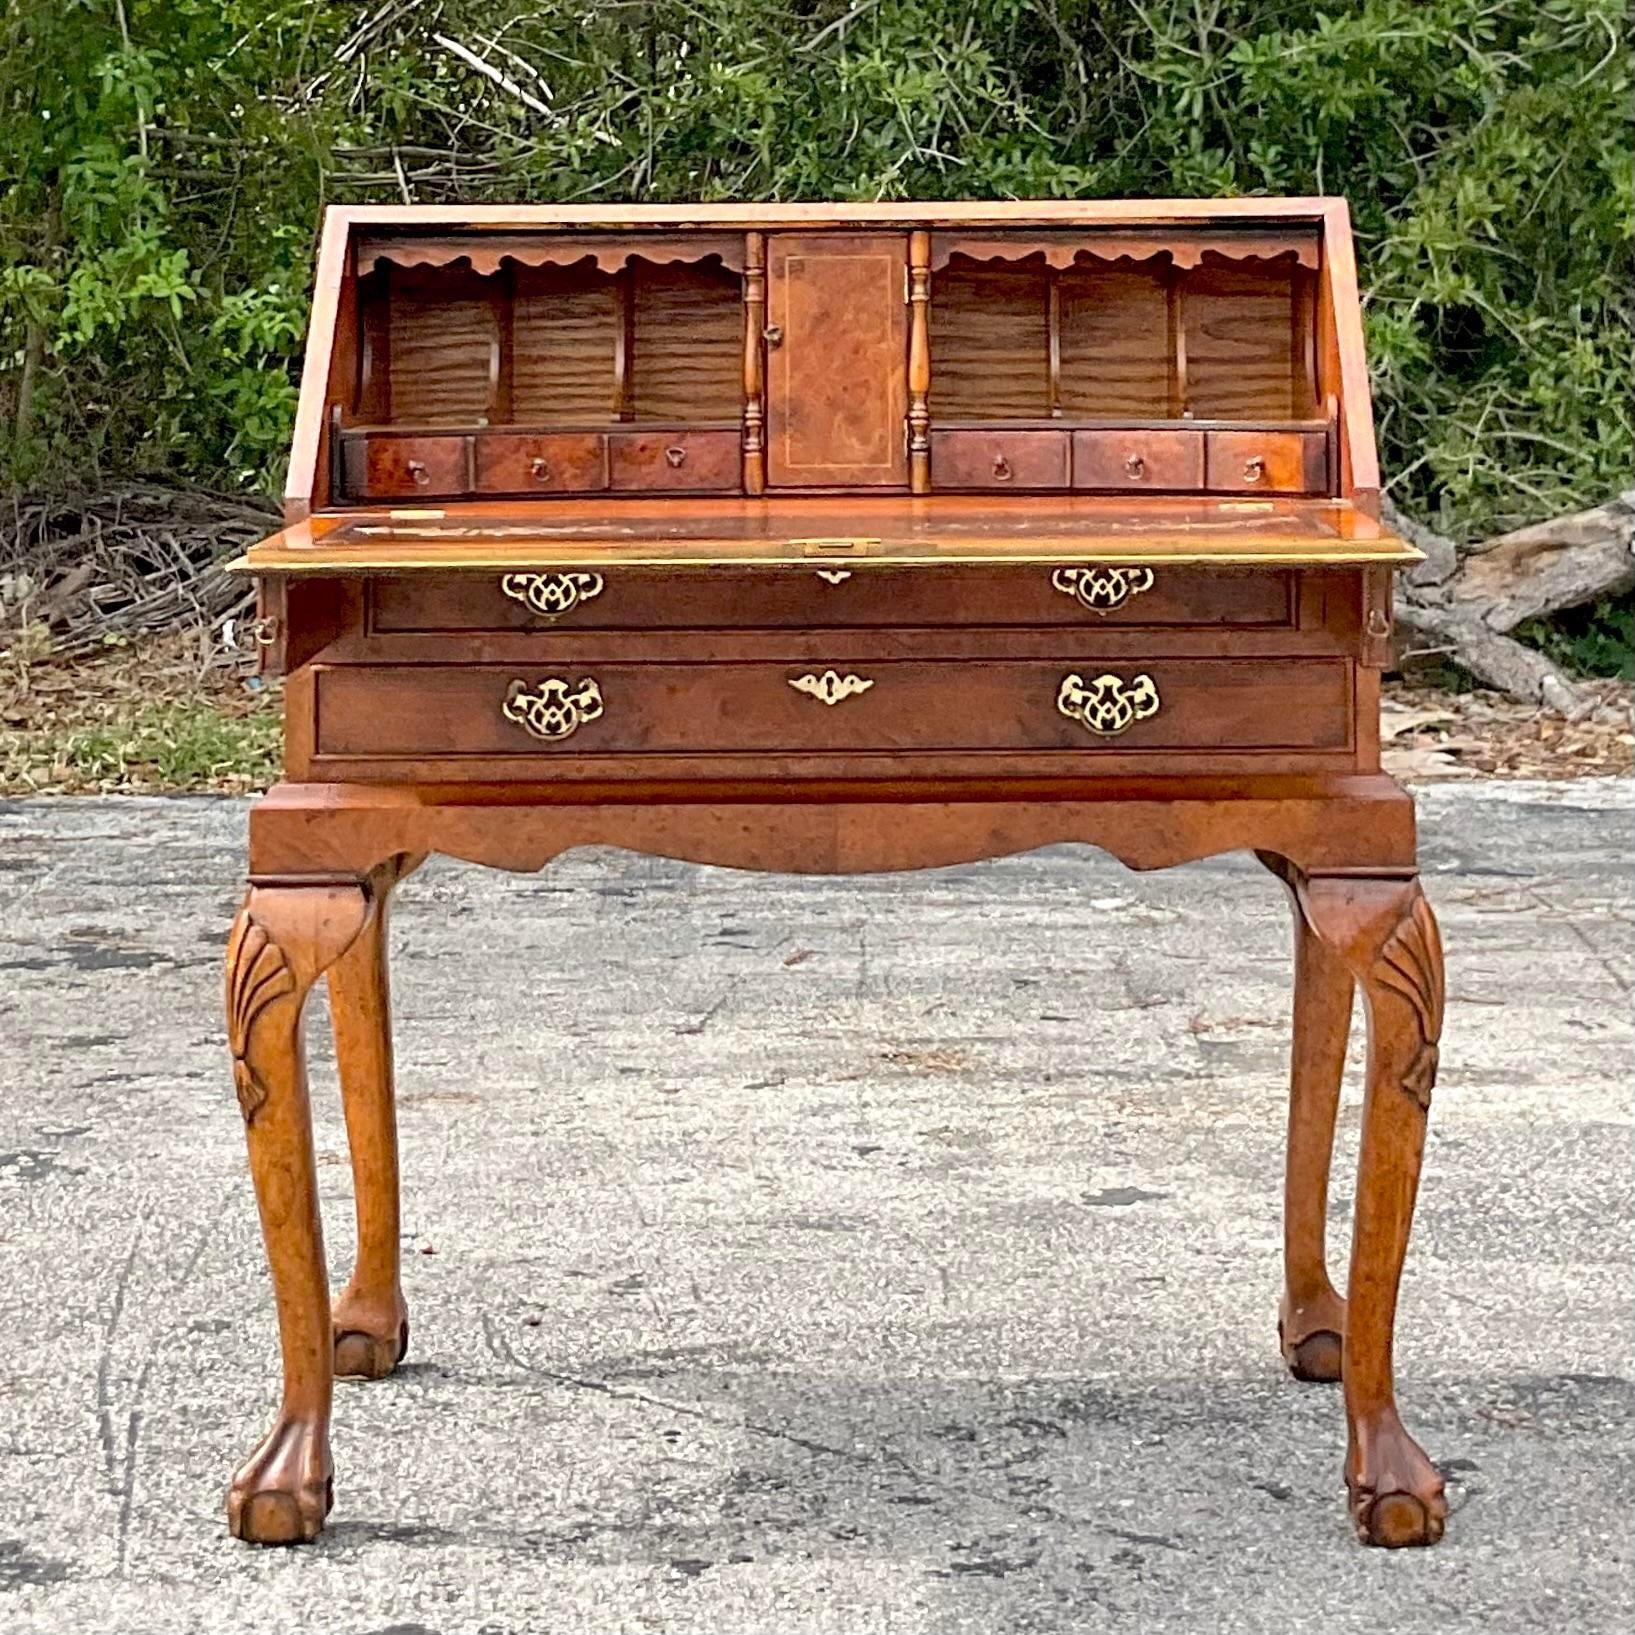 A fantastic vintage Boho writing desk. A gorgeous Burl wood flip down design. Beautiful hand carved detail and cabriolet legs. Lots of great storage inside. Acquired from a Palm Beach estate.